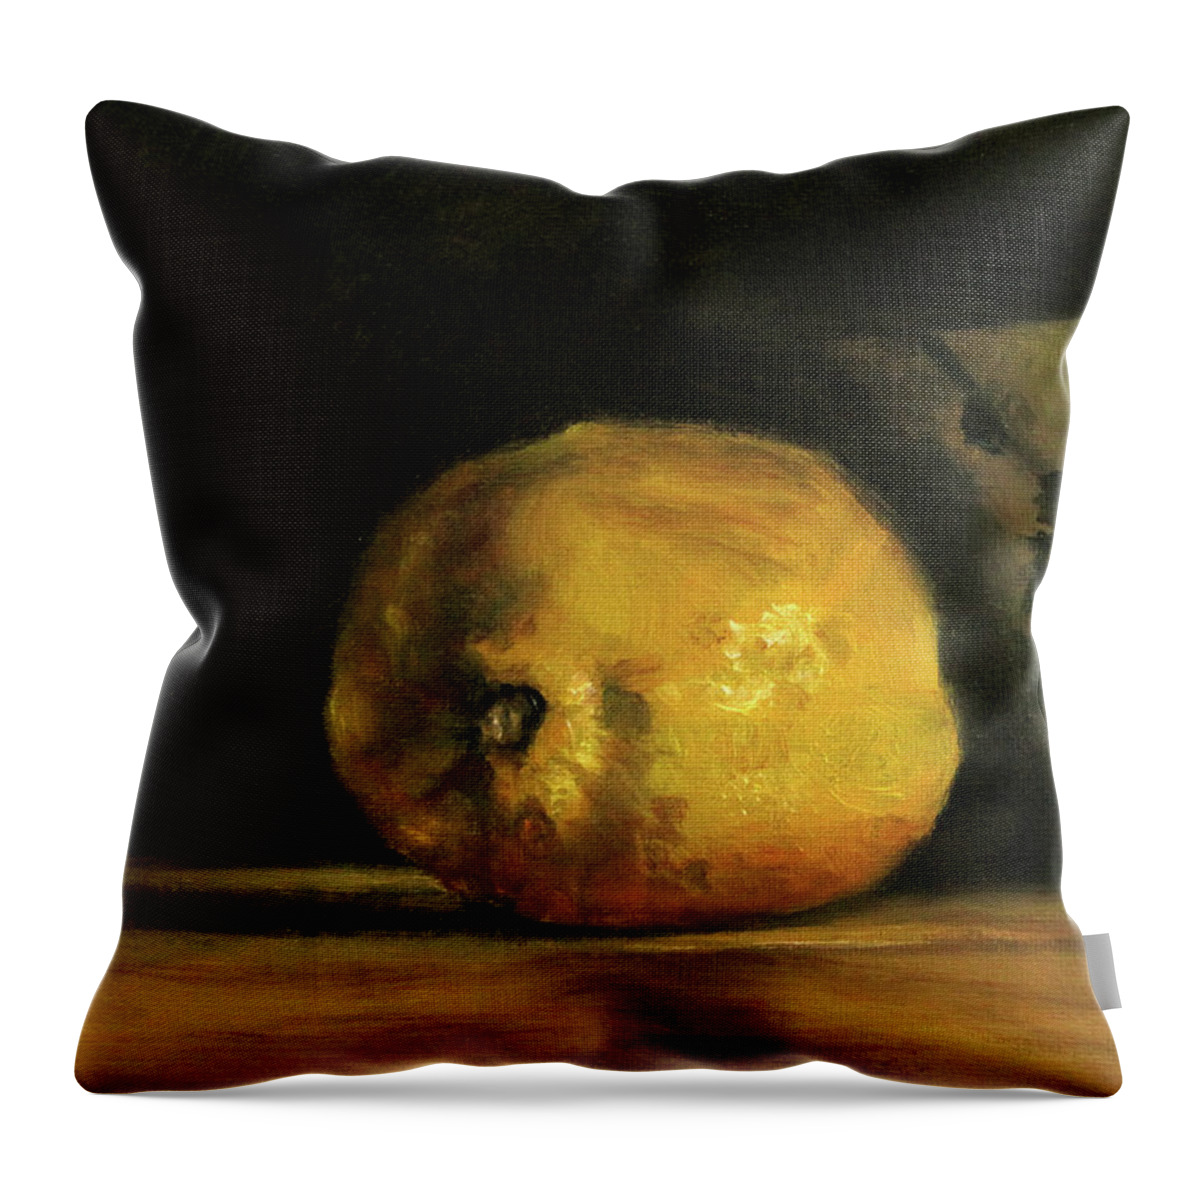 Lemon Throw Pillow featuring the painting Lemon with Asian Bowl by Ulrike Miesen-Schuermann